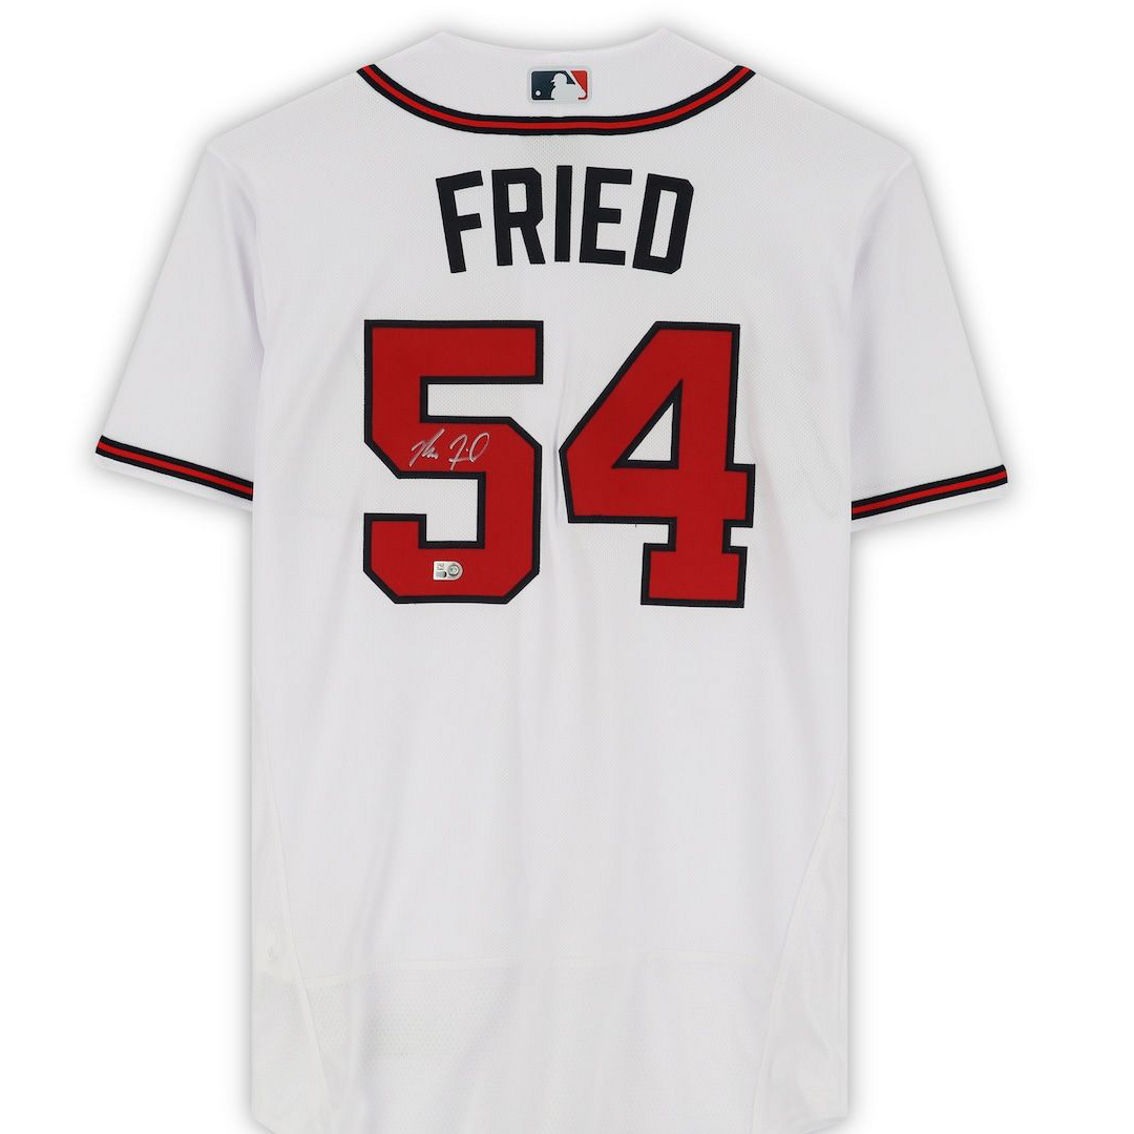 Fanatics Authentic Max Fried Atlanta Braves Autographed White Authentic Jersey - Image 3 of 4